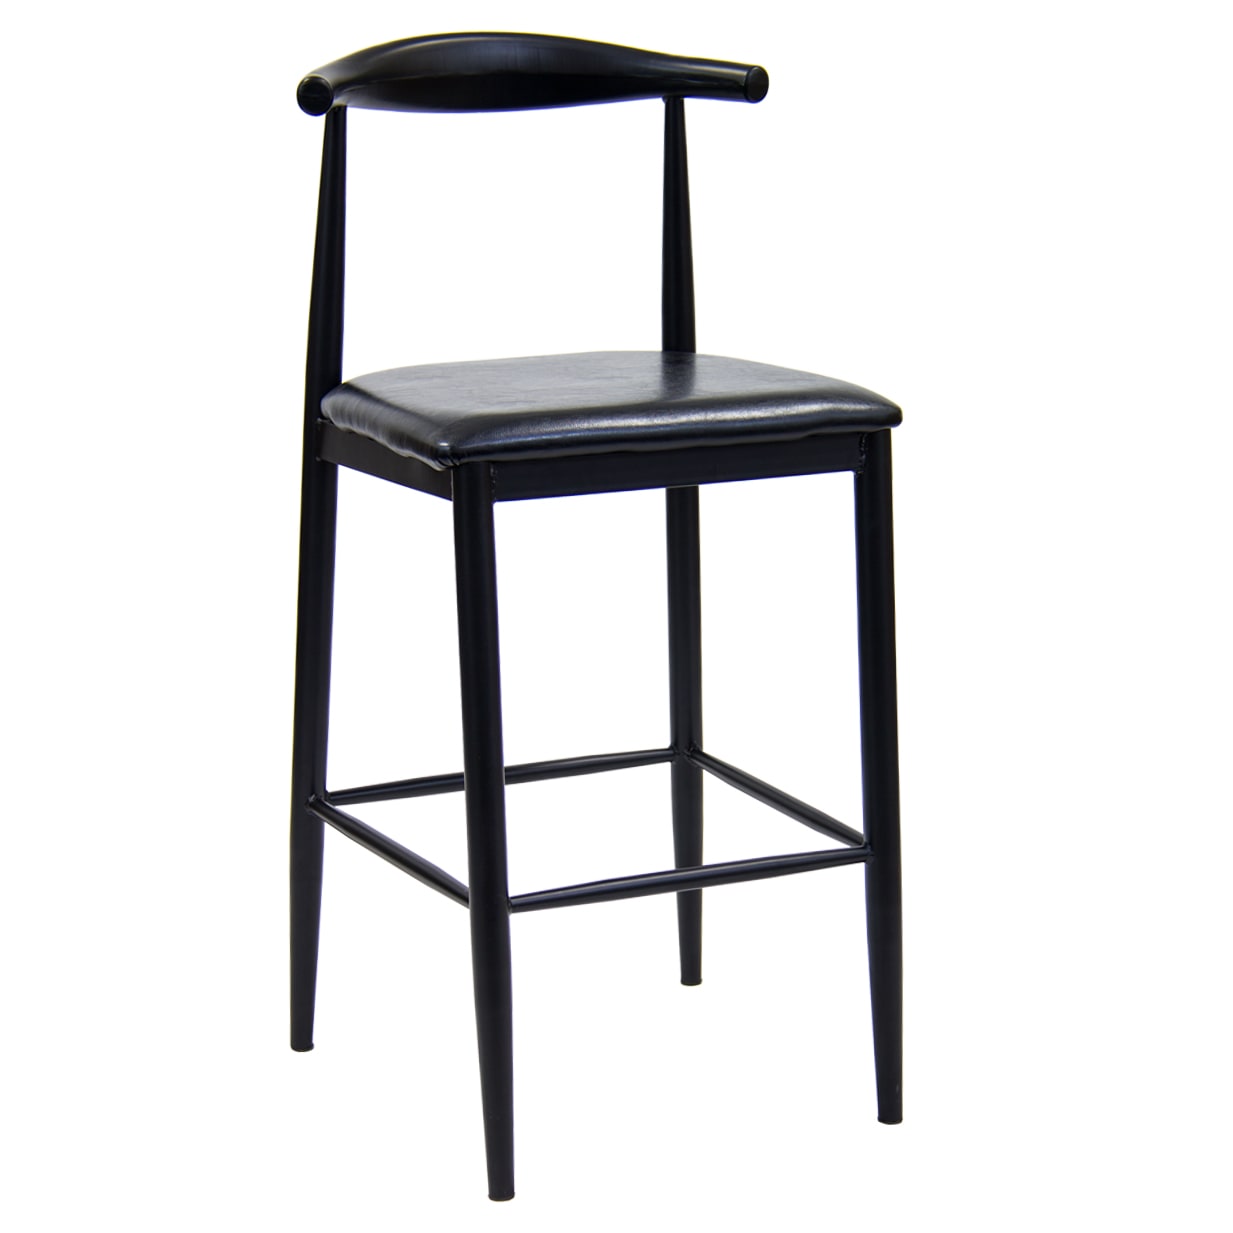 Curved Back Metal Bar Stool in Black Finish with Black Vinyl Seat with Curved Back Metal Bar Stool in Black Finish with Black Vinyl Seat